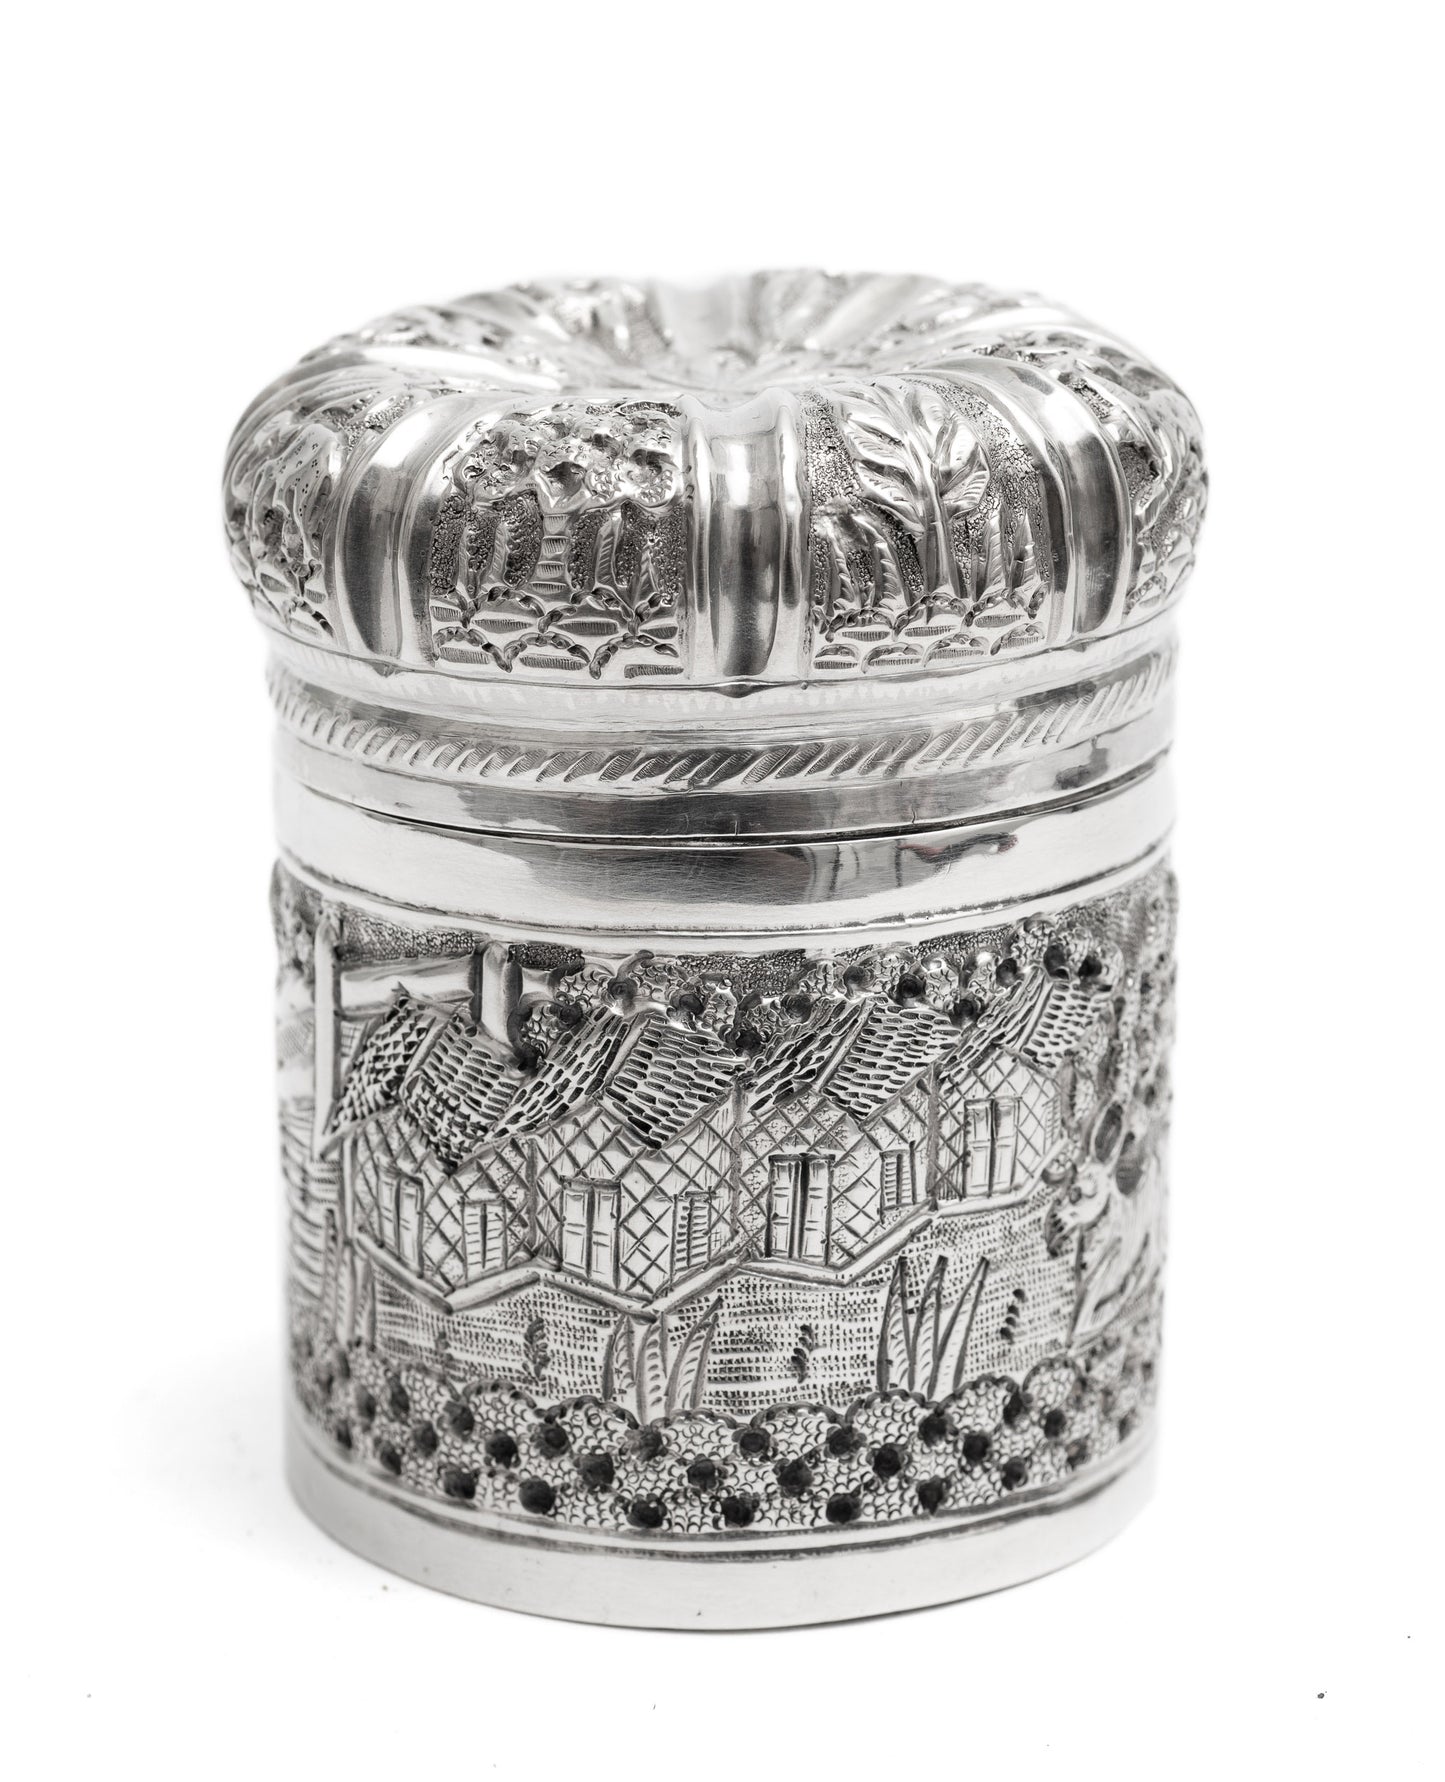 Antique Indian/Ceylonese Silver Repousse Lidded Box with Village Scene c1880 (Code 2258)